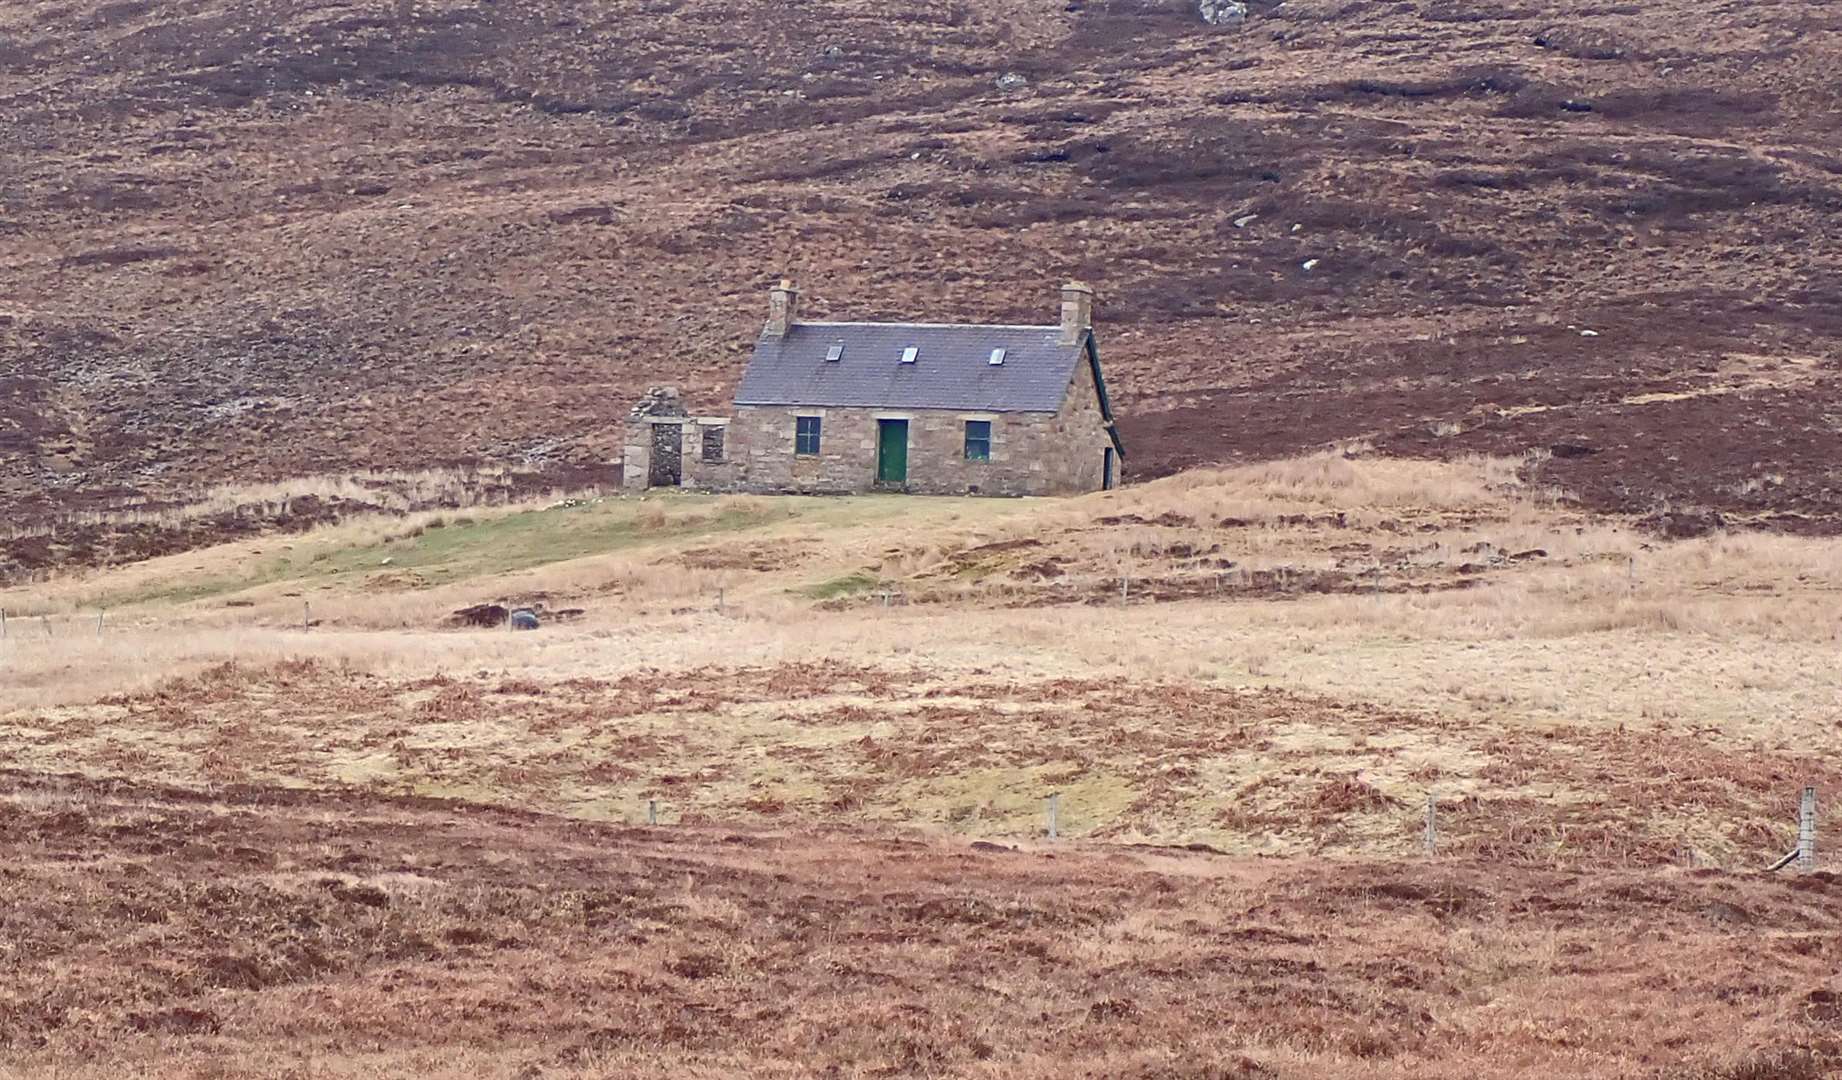 The bothy.